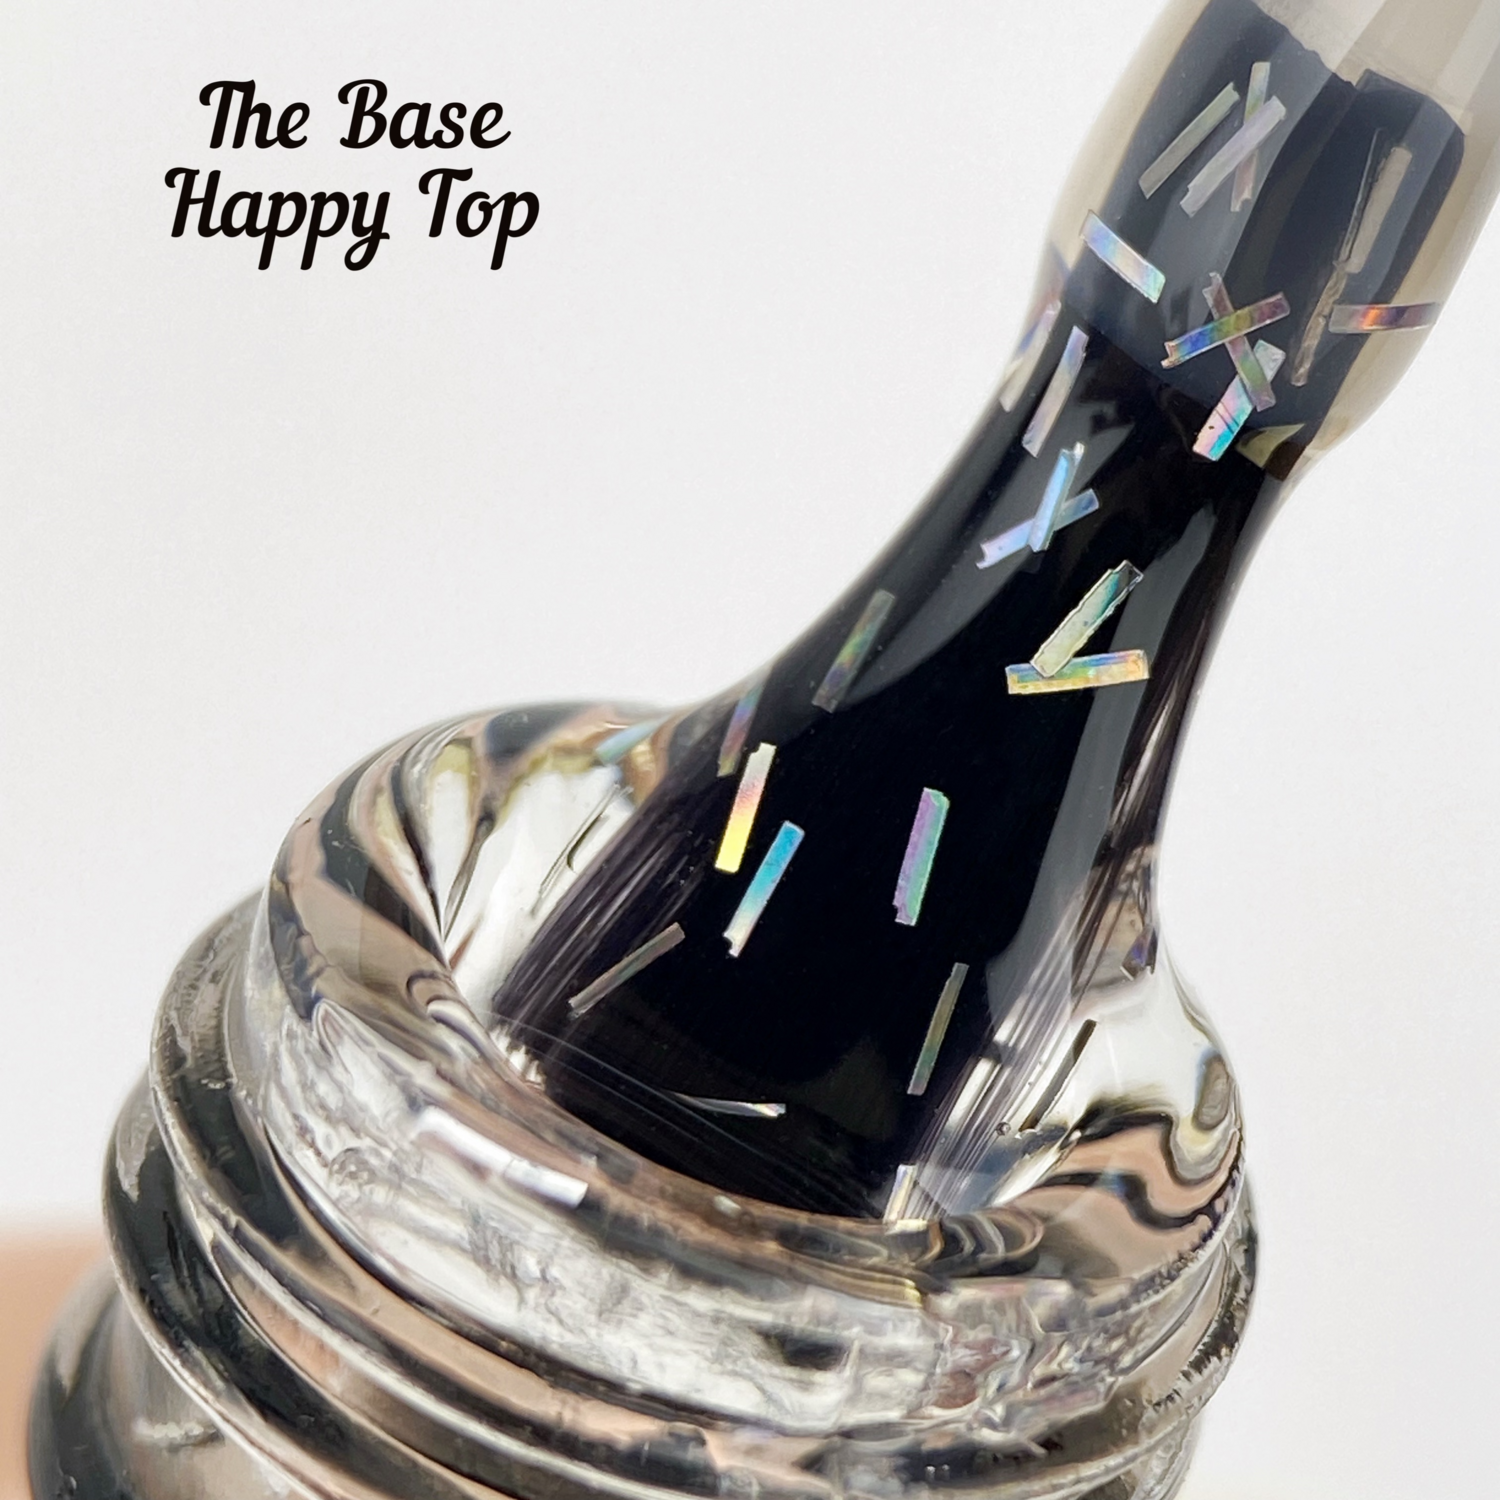 The Base 8.0 Top Happy